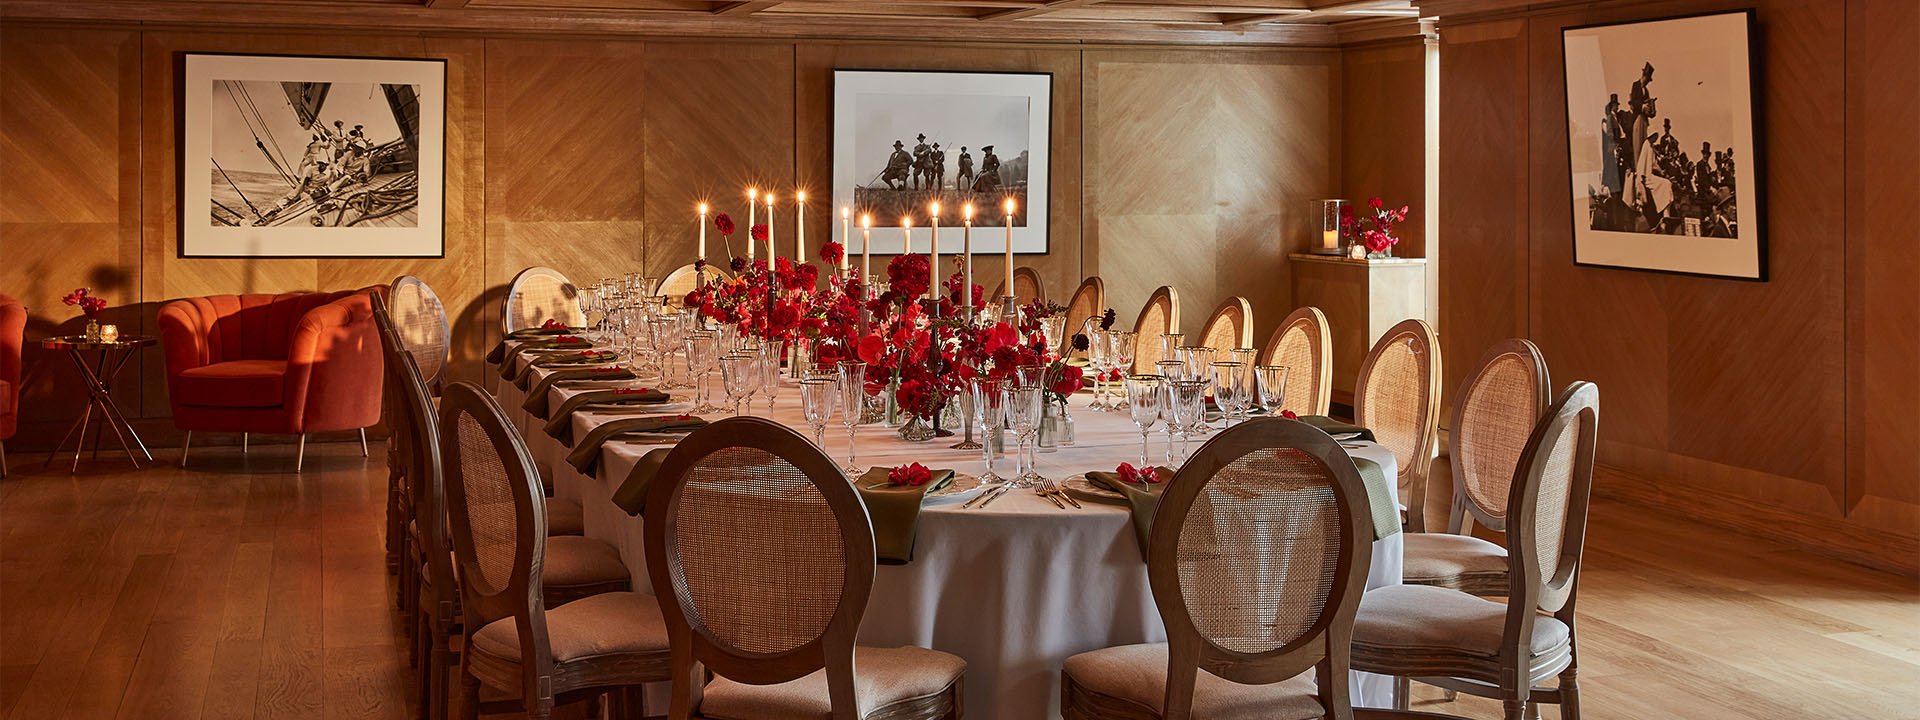 A luxurious dining room is set for an event featuring a long oval table with a white tablecloth, a red floral centrepiece and tall candles. In the background to the left, a round coral armchair is placed next to a round table with a vase and flowers.